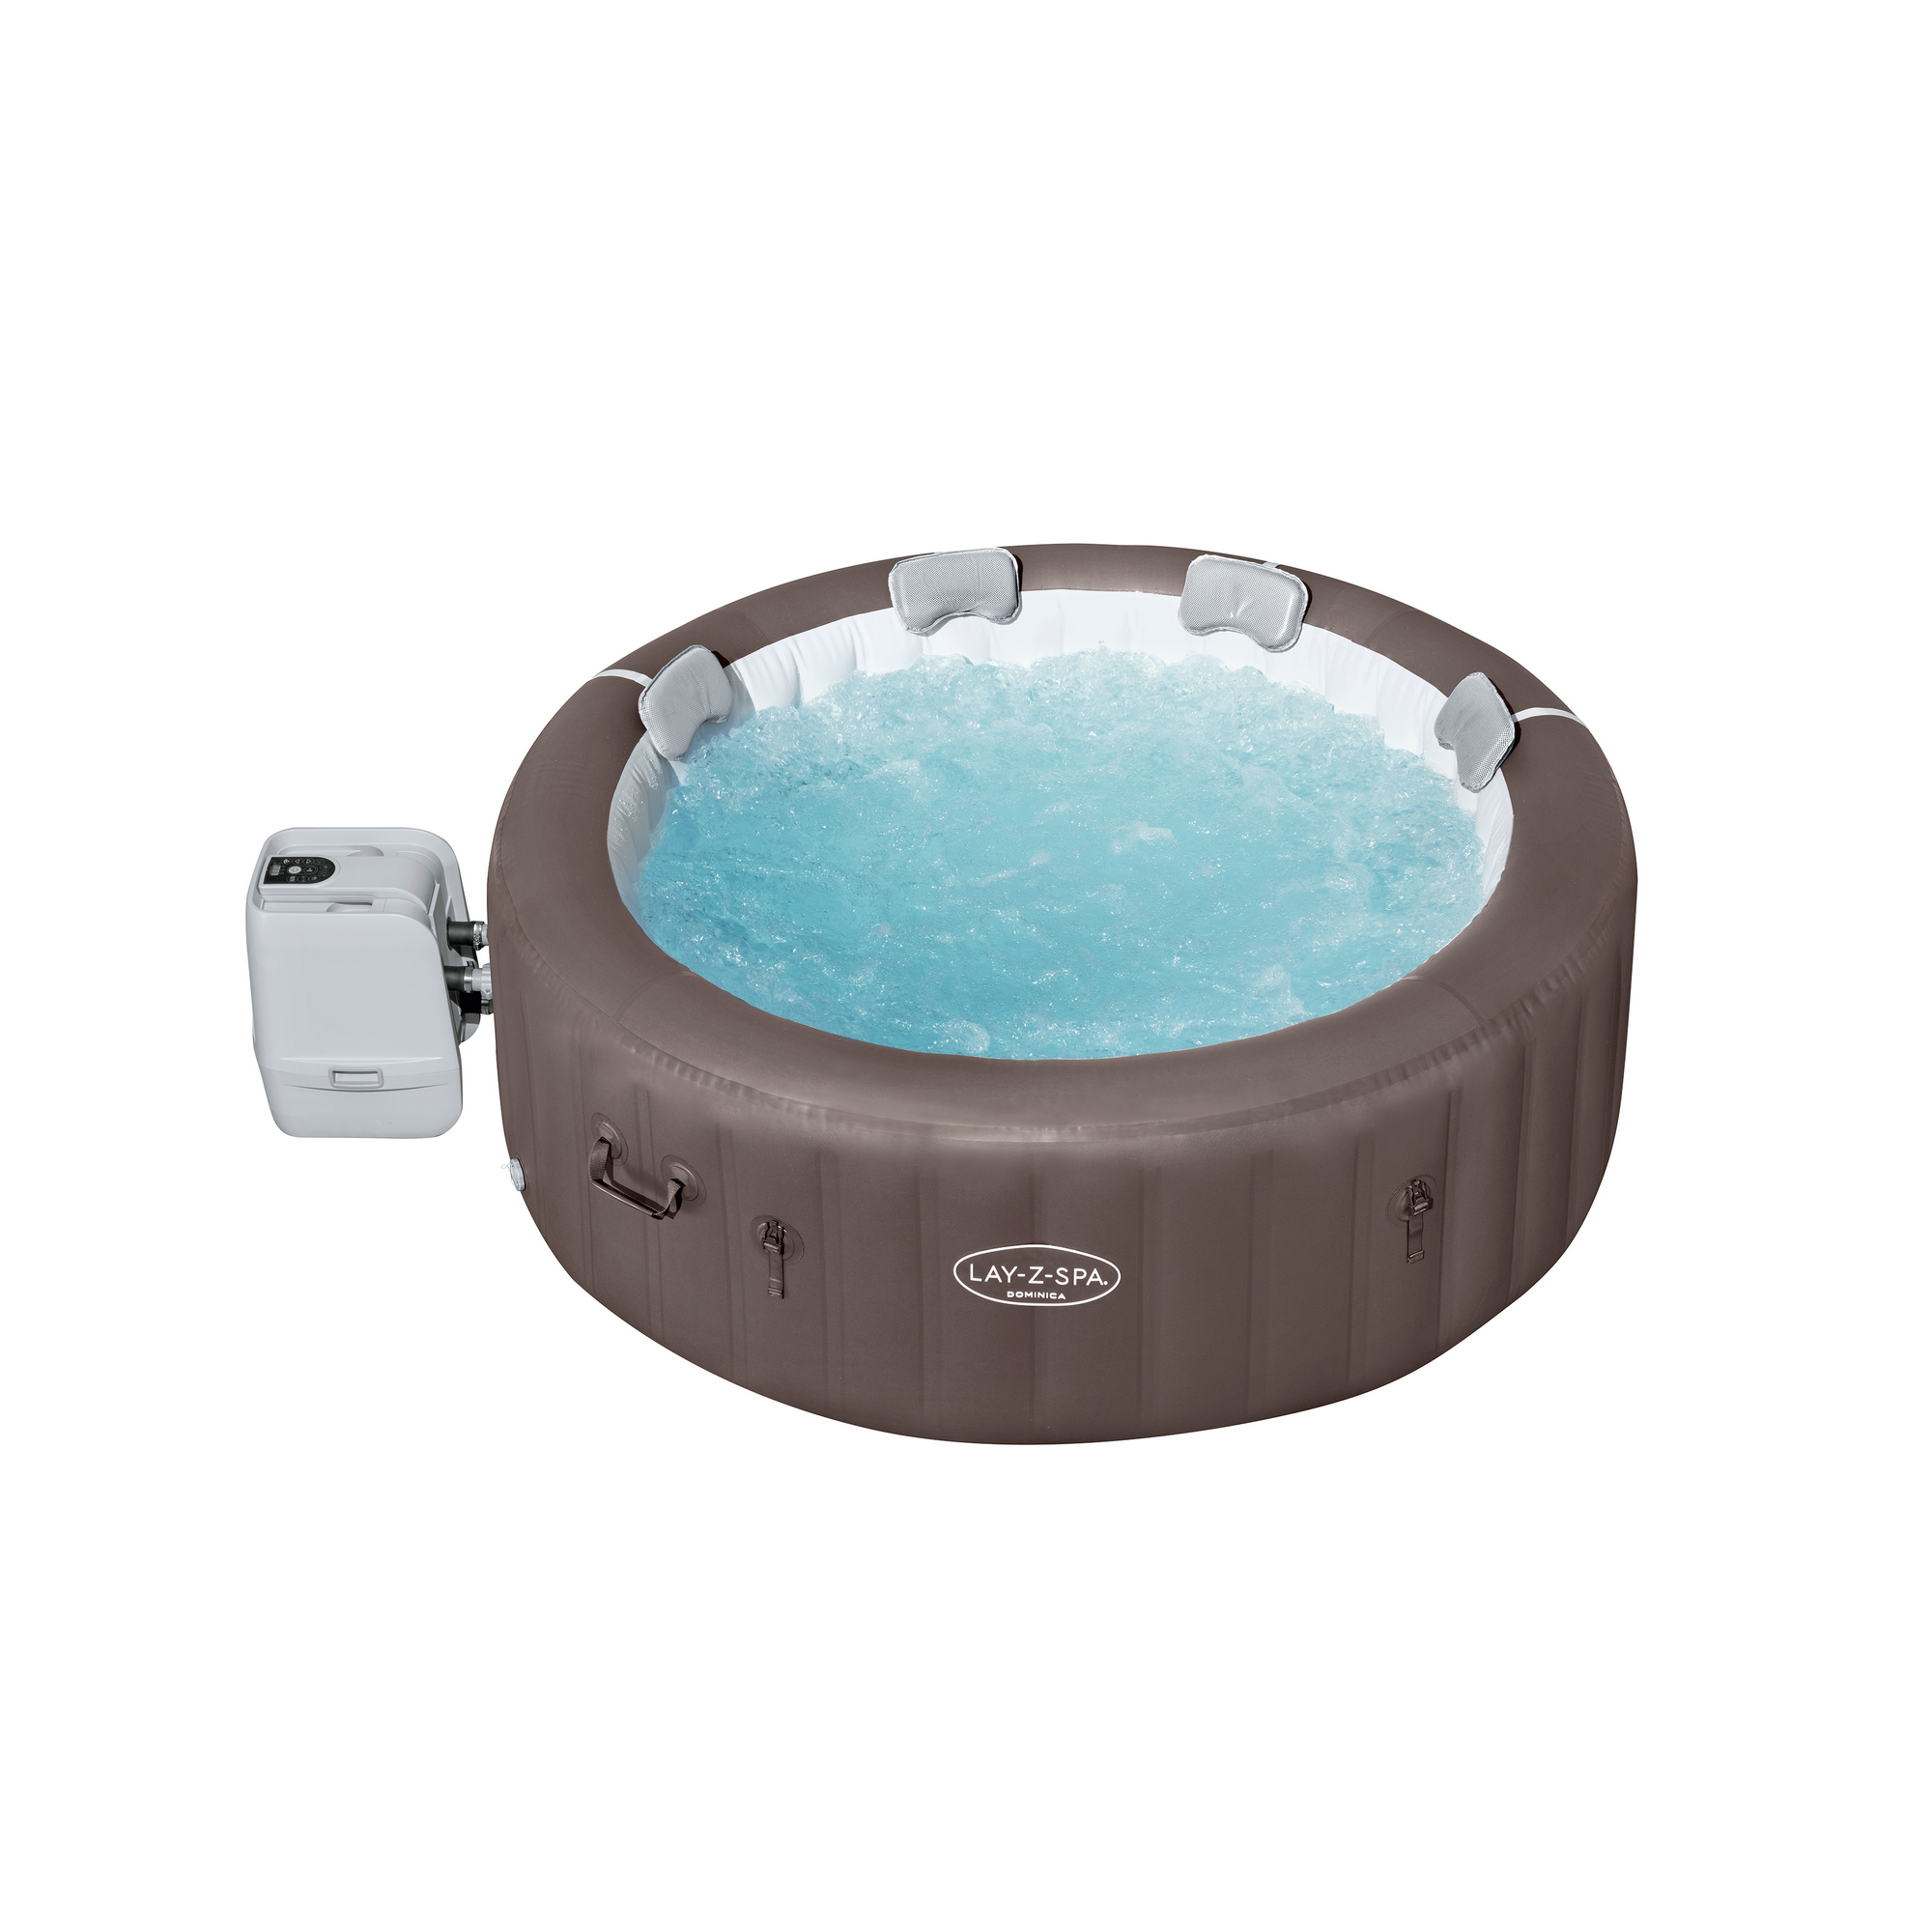 Whirlpool 'LAY-Z-SPA® Dominica HydroJet™' braun/weiß Ø 196 x 71 cm + product picture